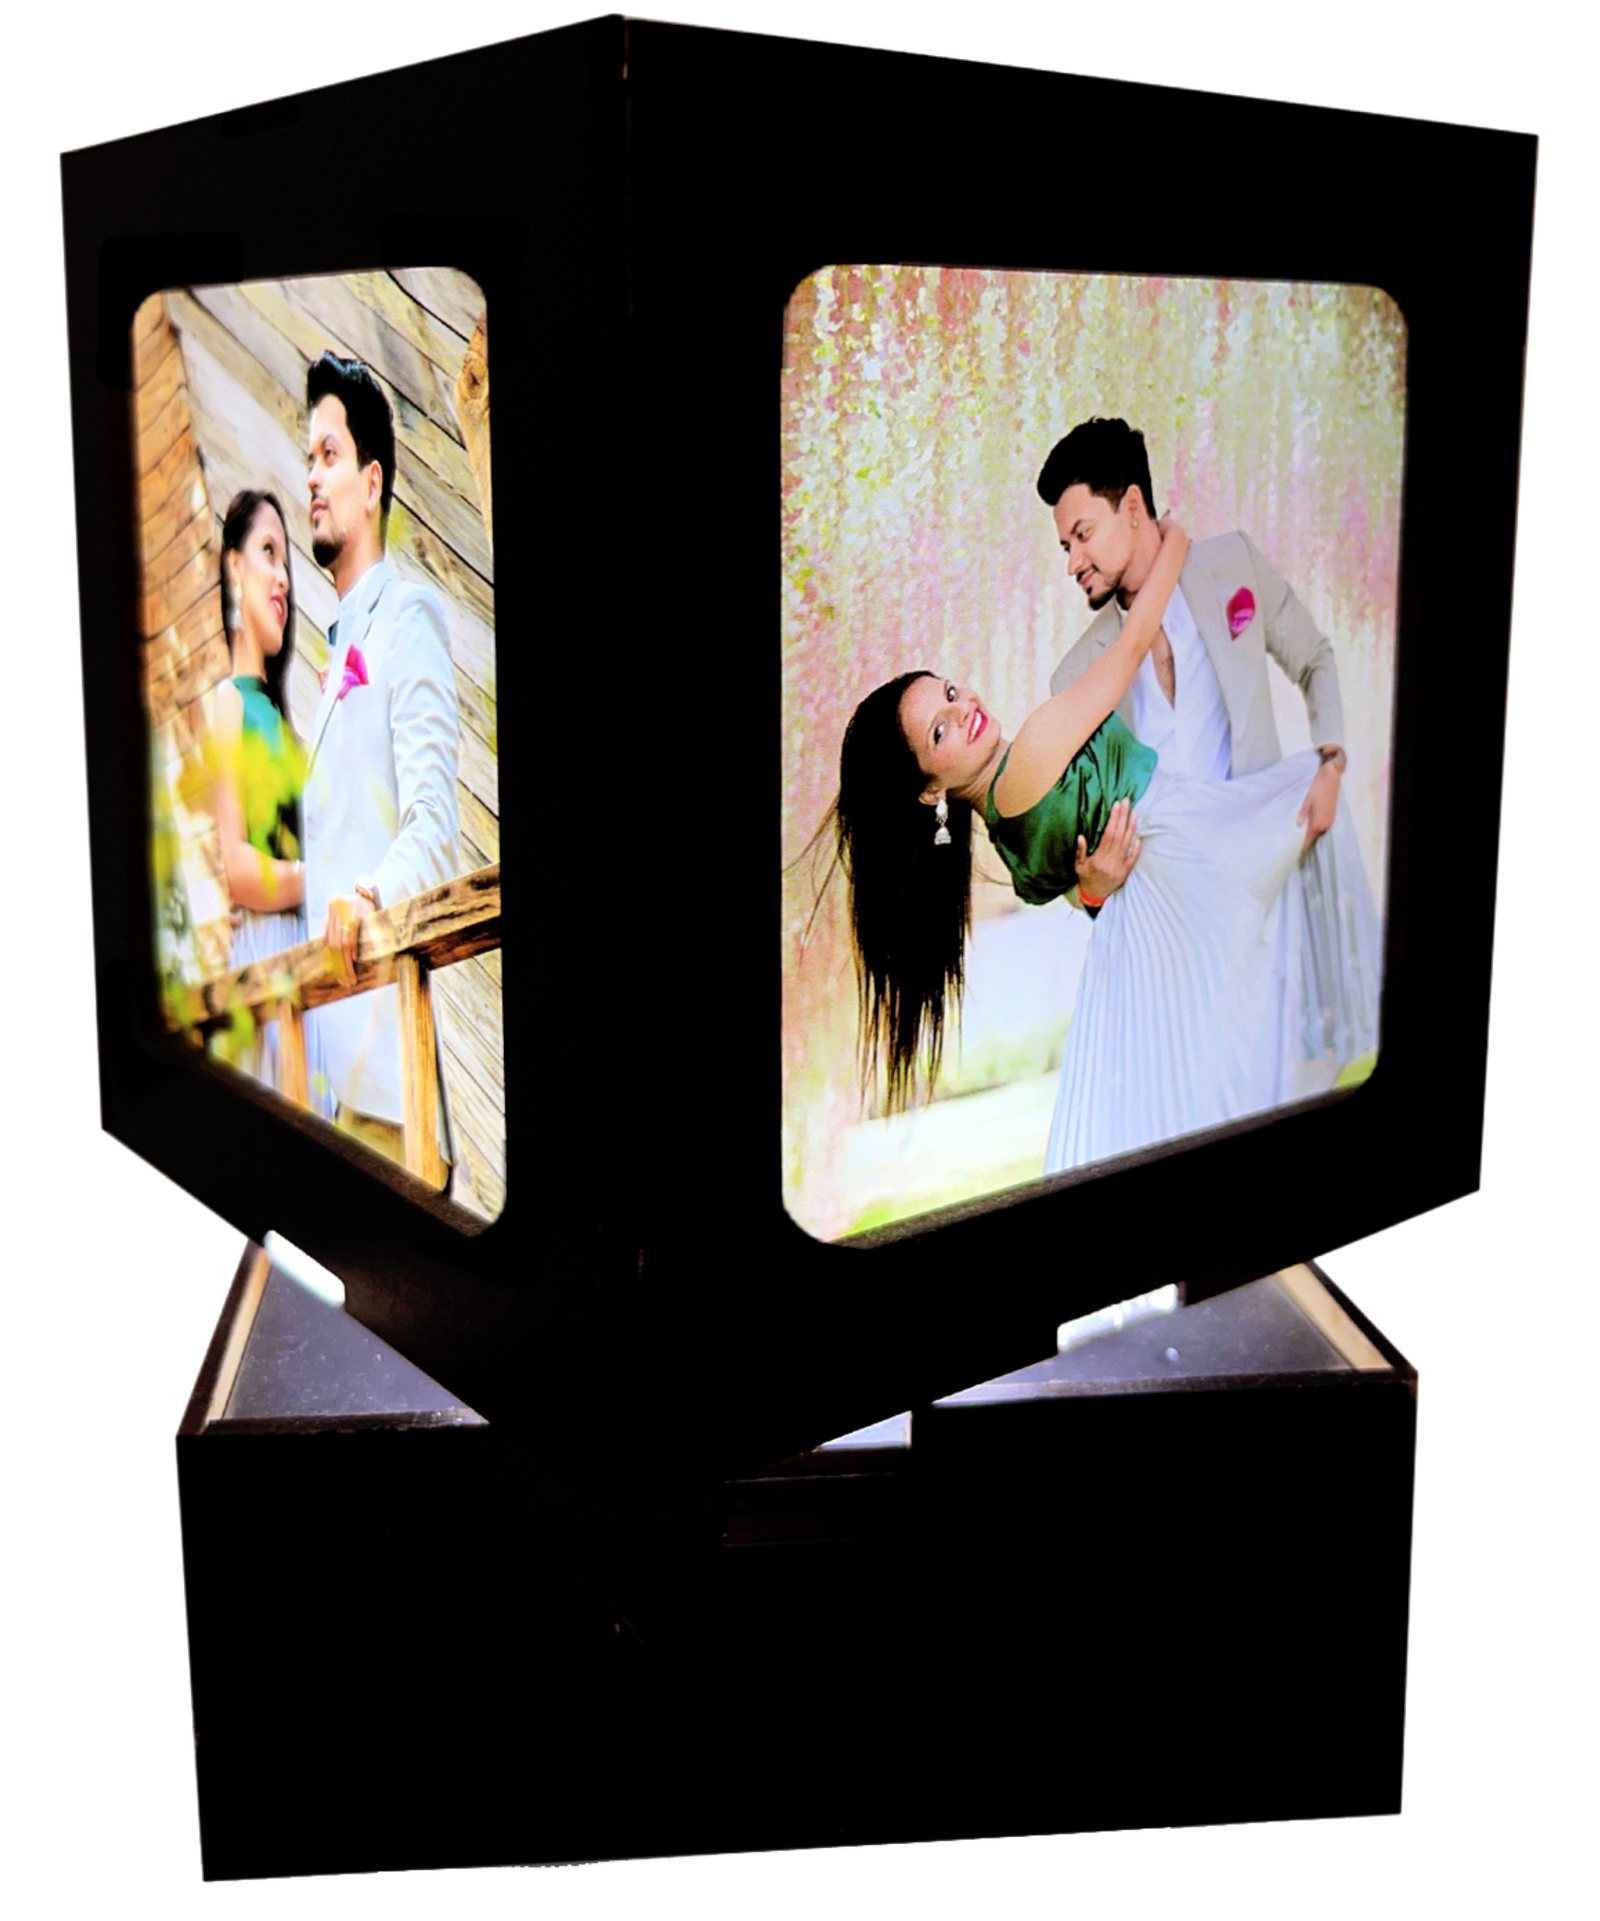 Buy AICA Love Couple Dome Showpiece LED LAMP | Valentine Day Gift for  Girlfriend Wife Online at Low Prices in India - Amazon.in